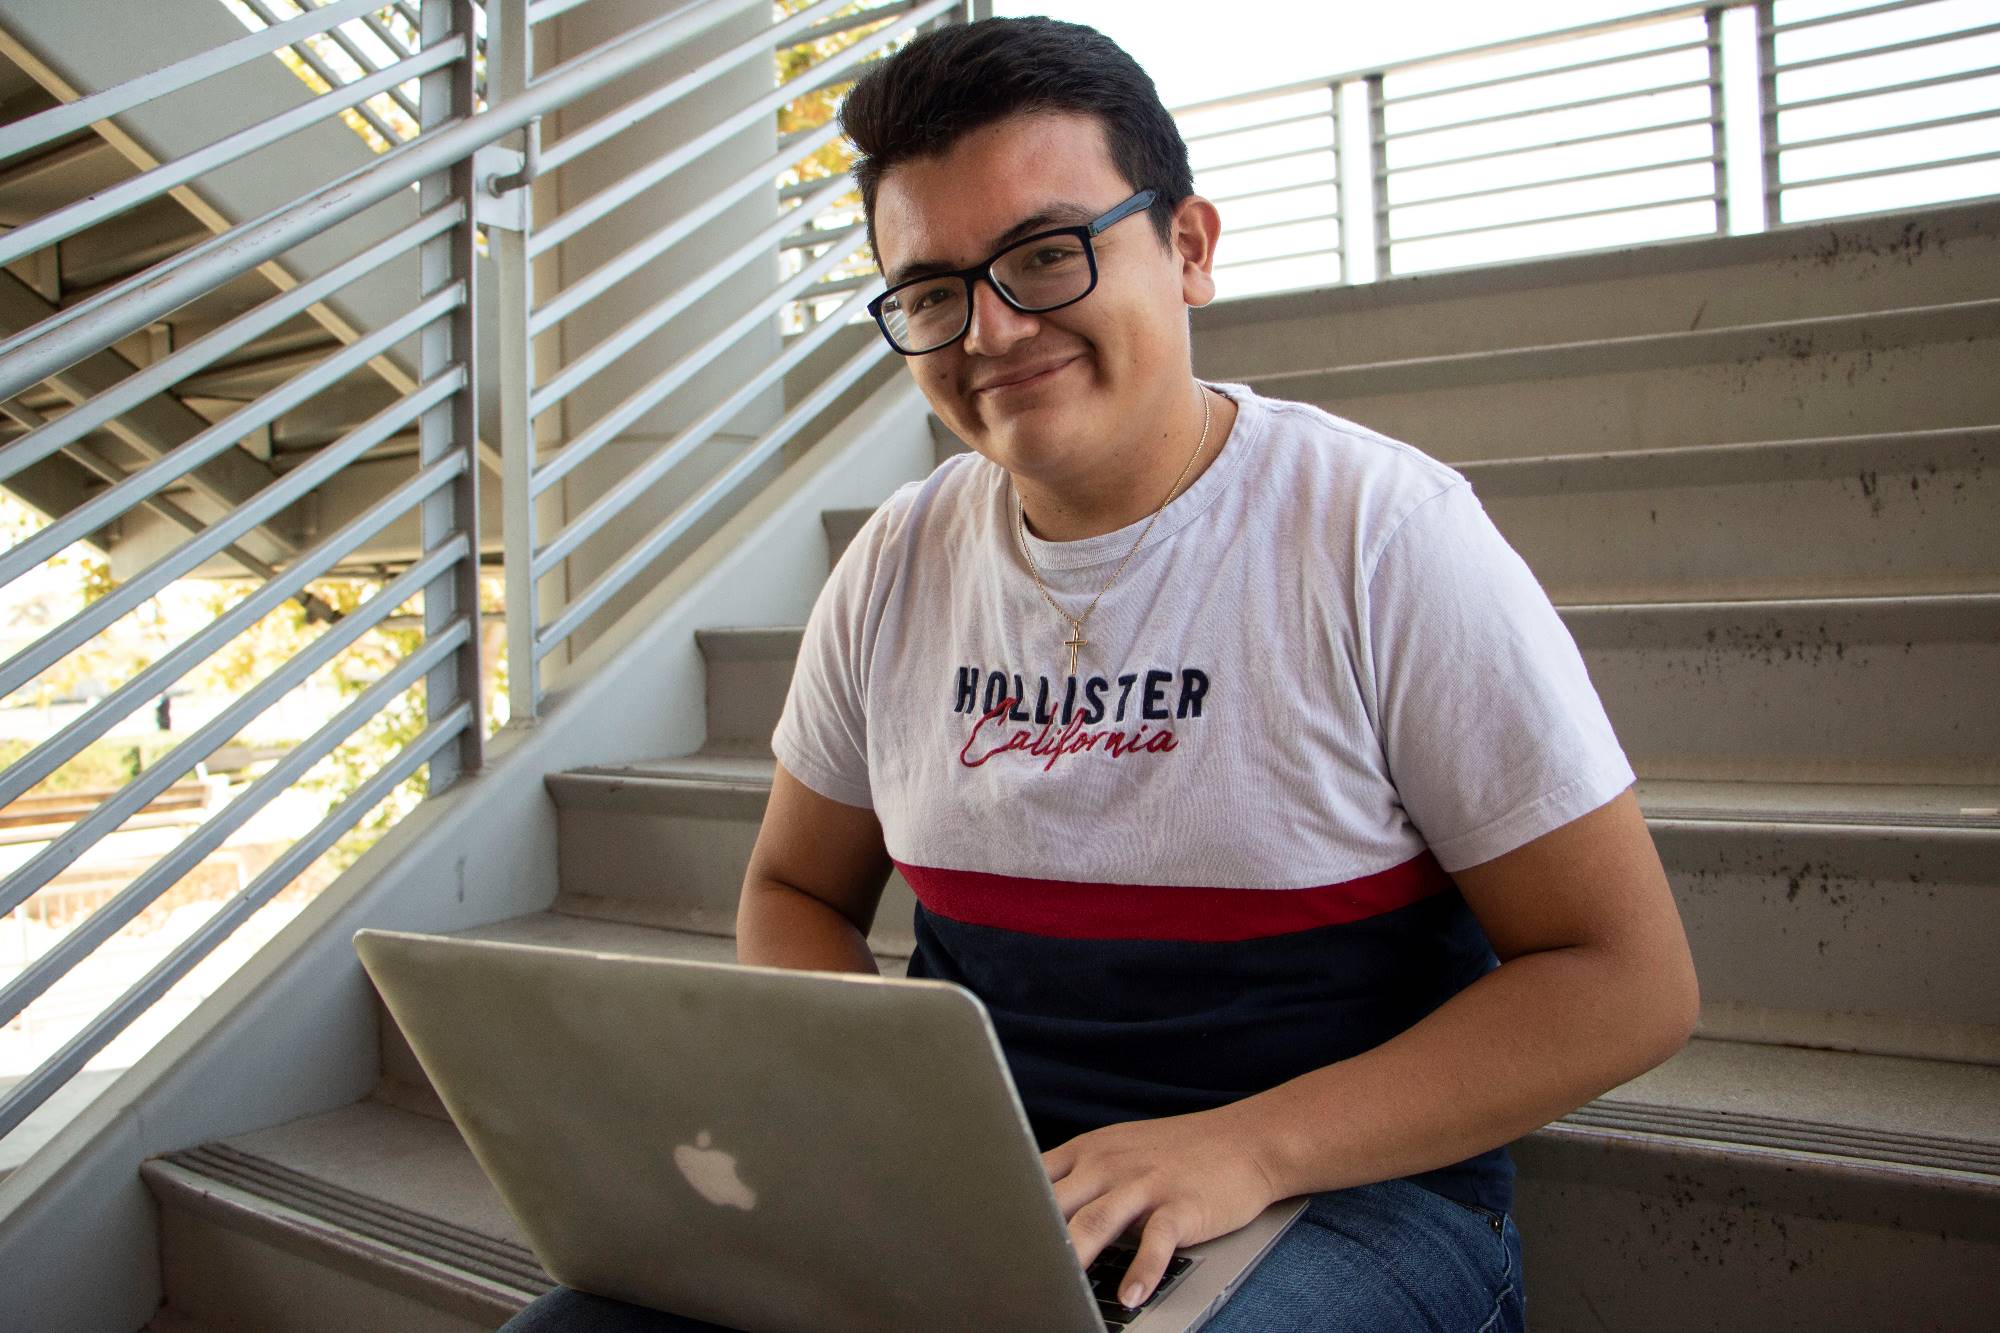 A student works on a laptop at the Fontana campus.